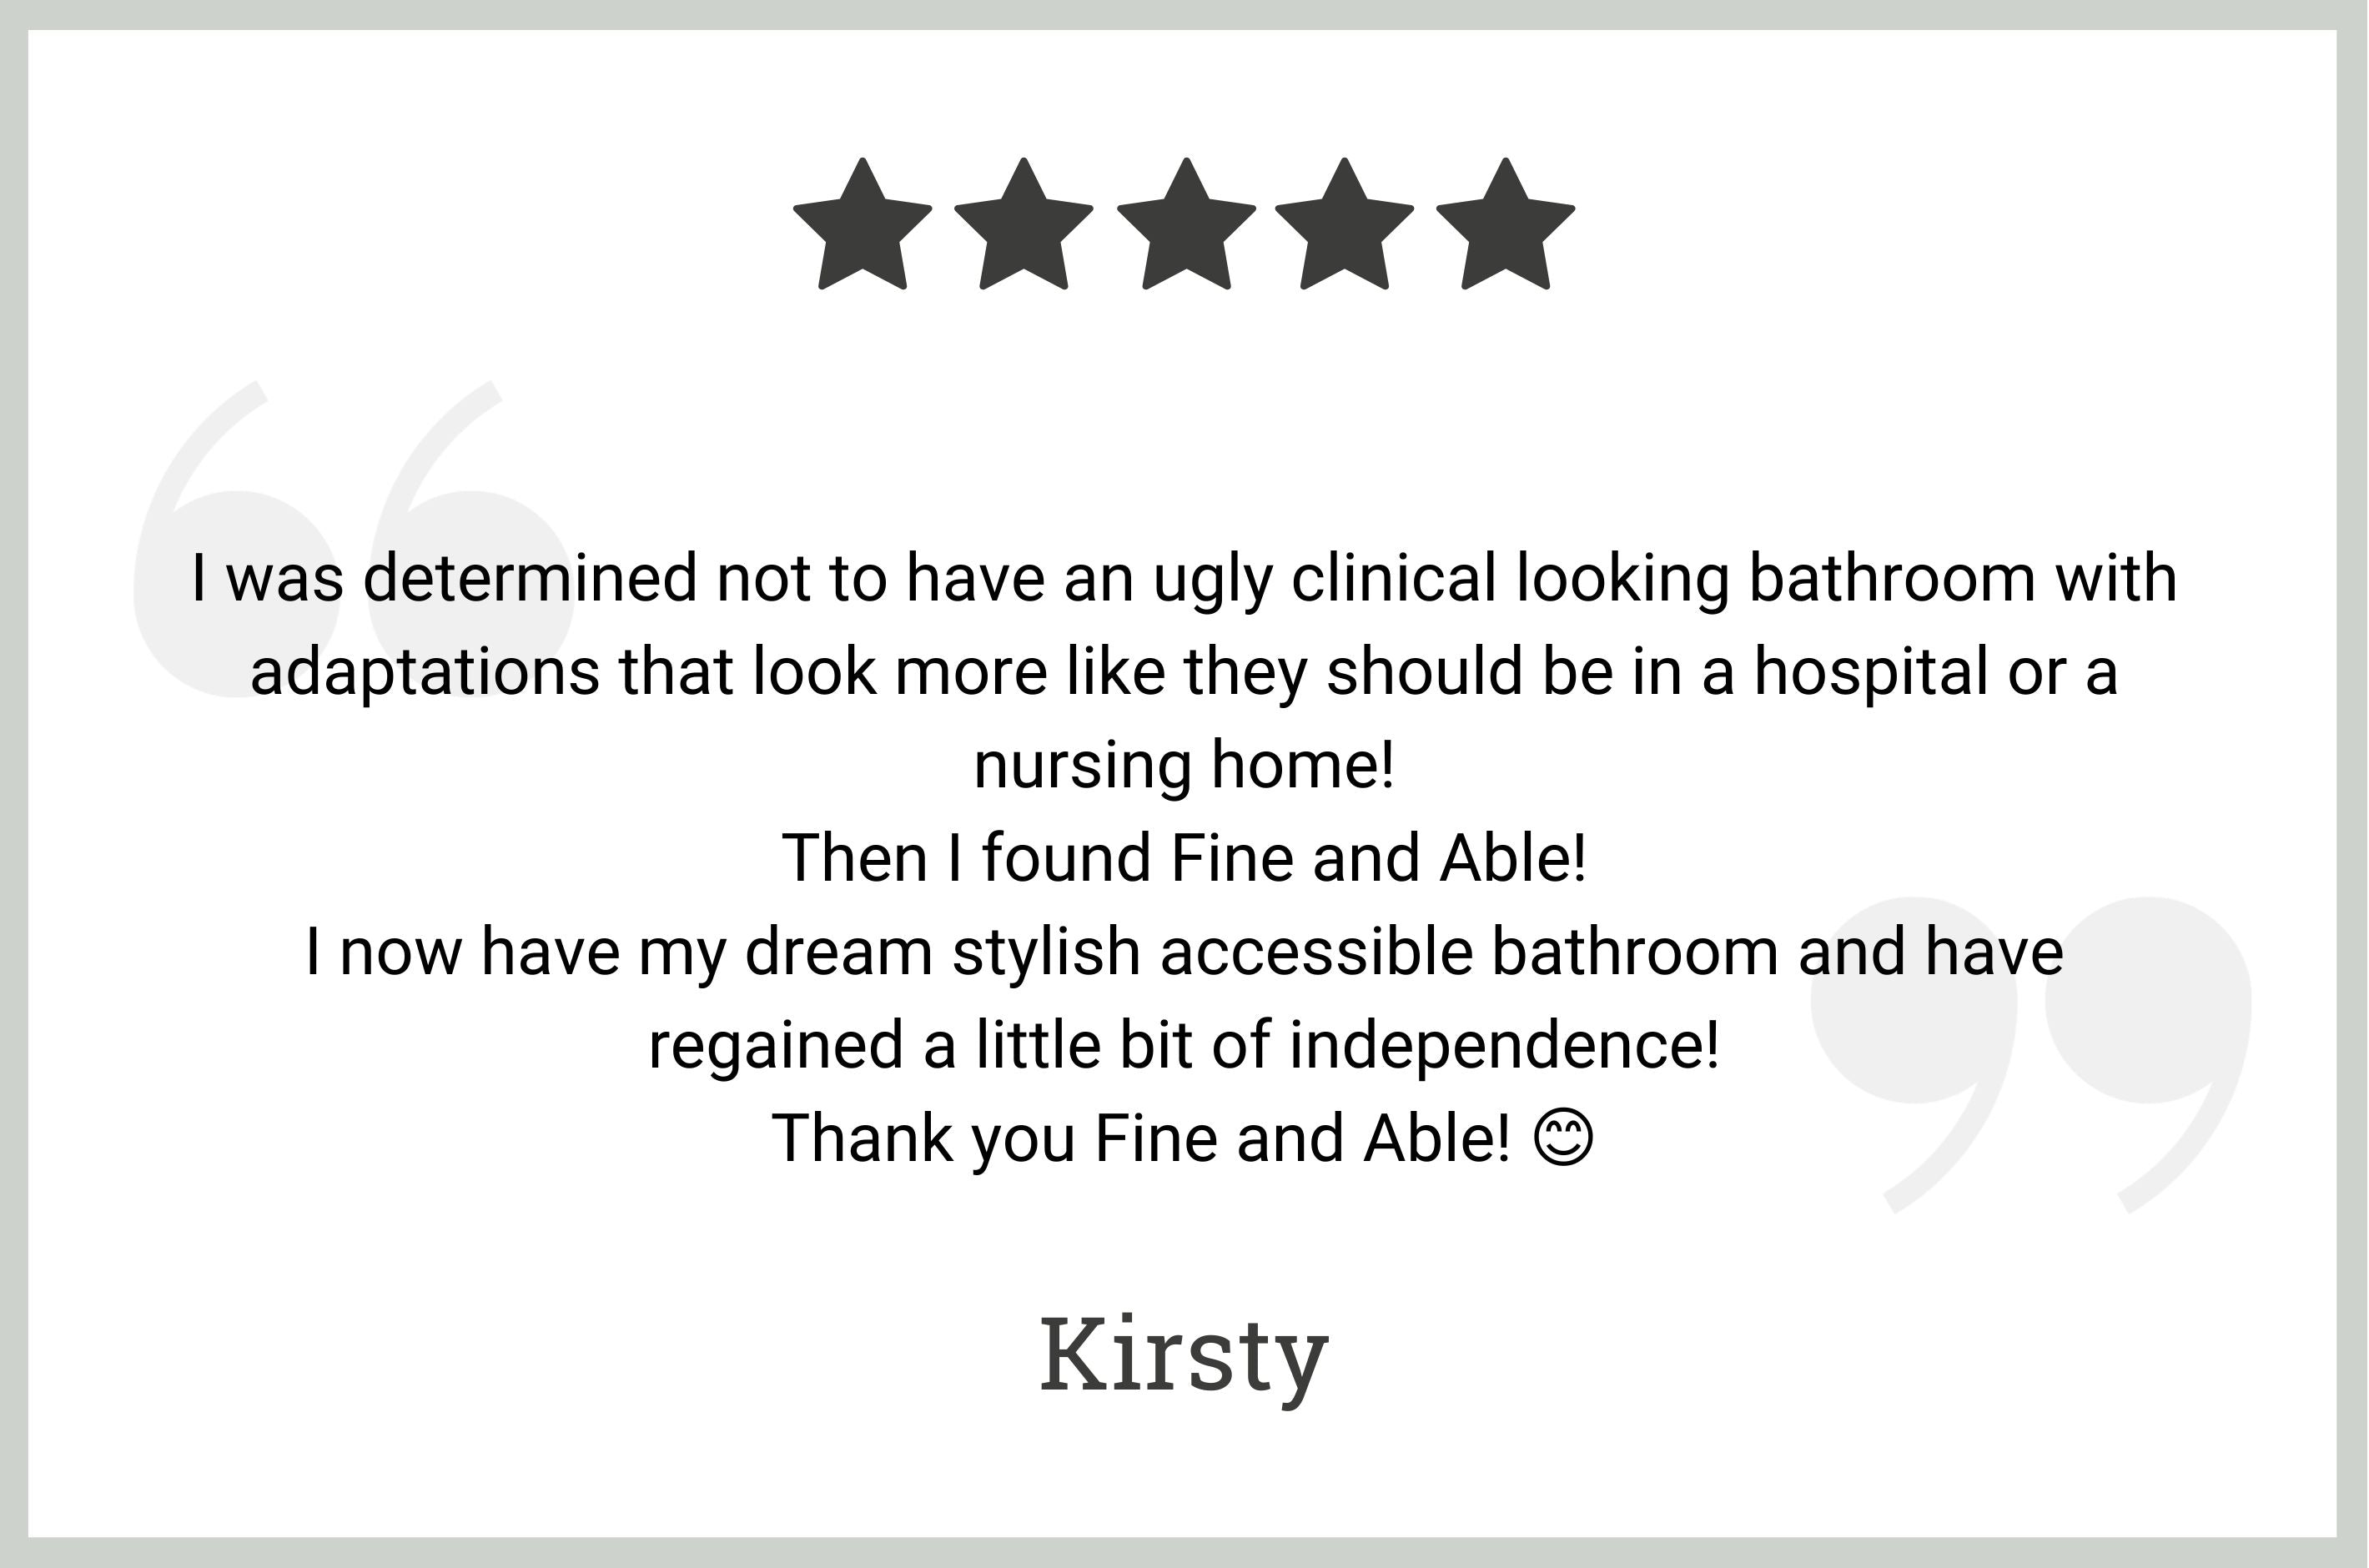 5 star review by Kirsty